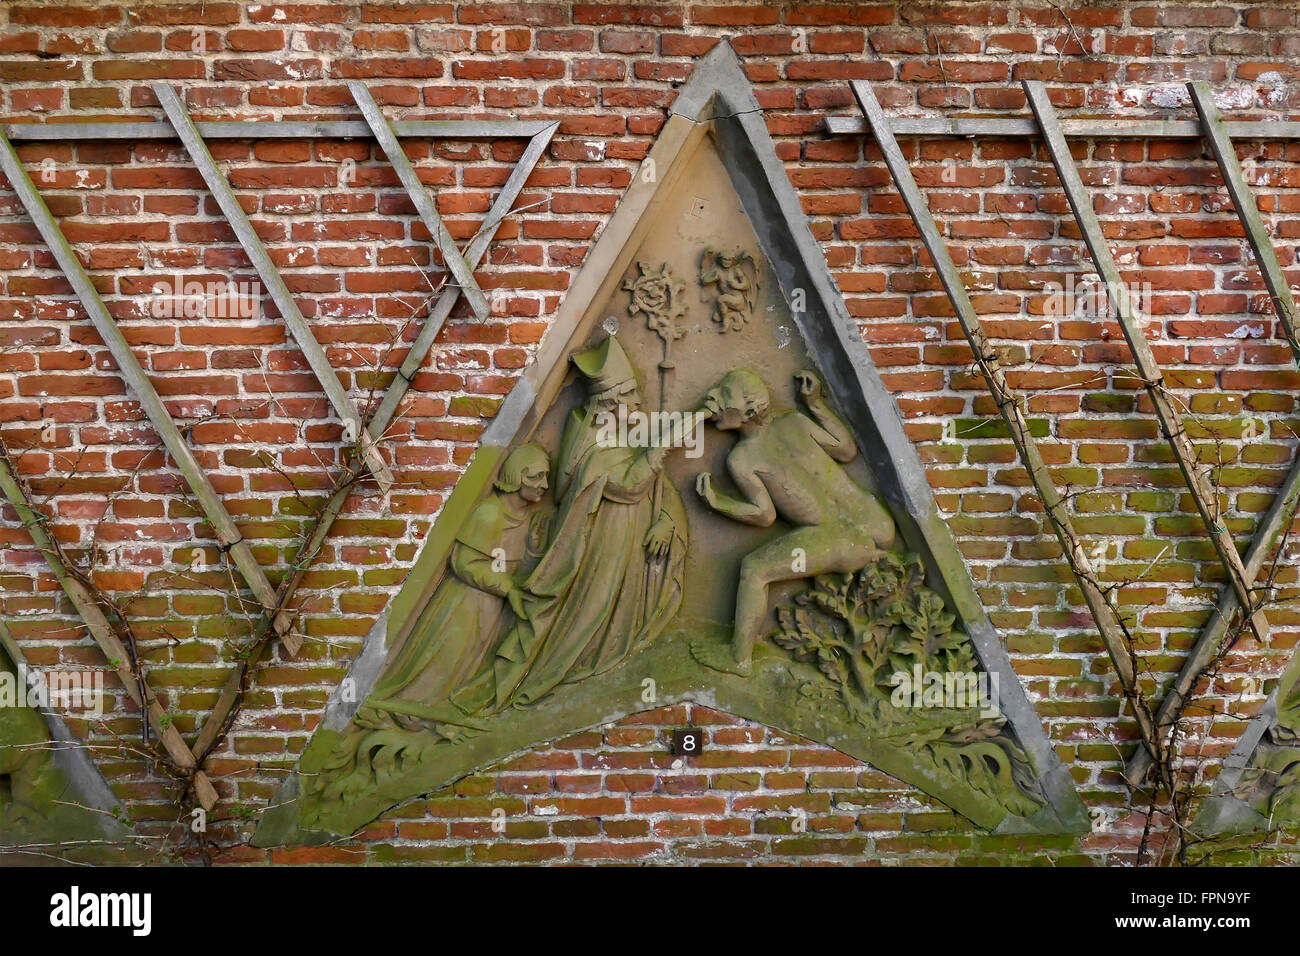 UTRECHT, THE NETHERLANDS - FEBRUARY 27, 2016: Flora's Hof Gothic religious facade in wall. Stock Photo